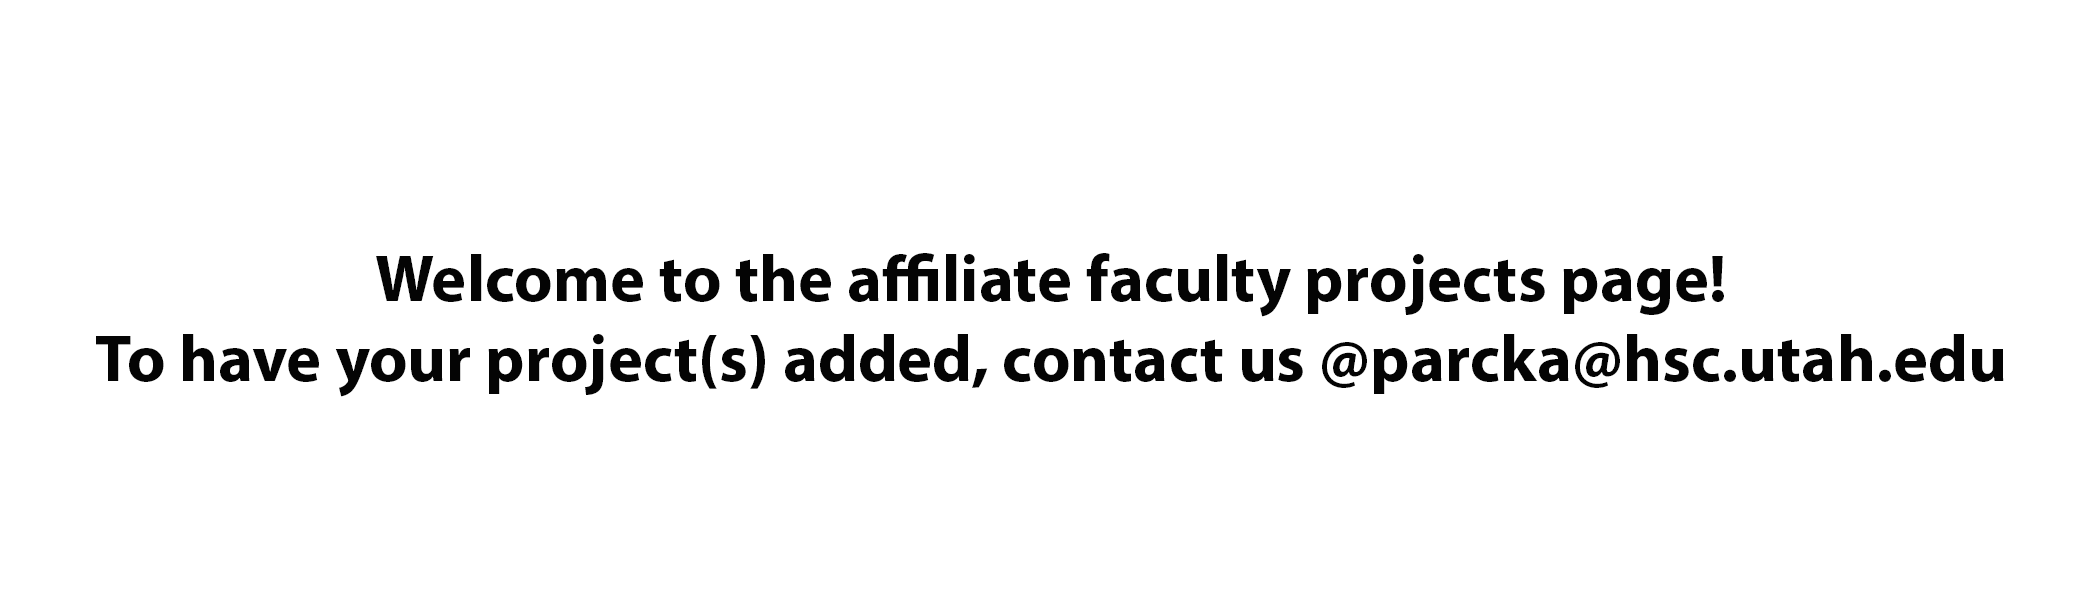 affiliate faculty